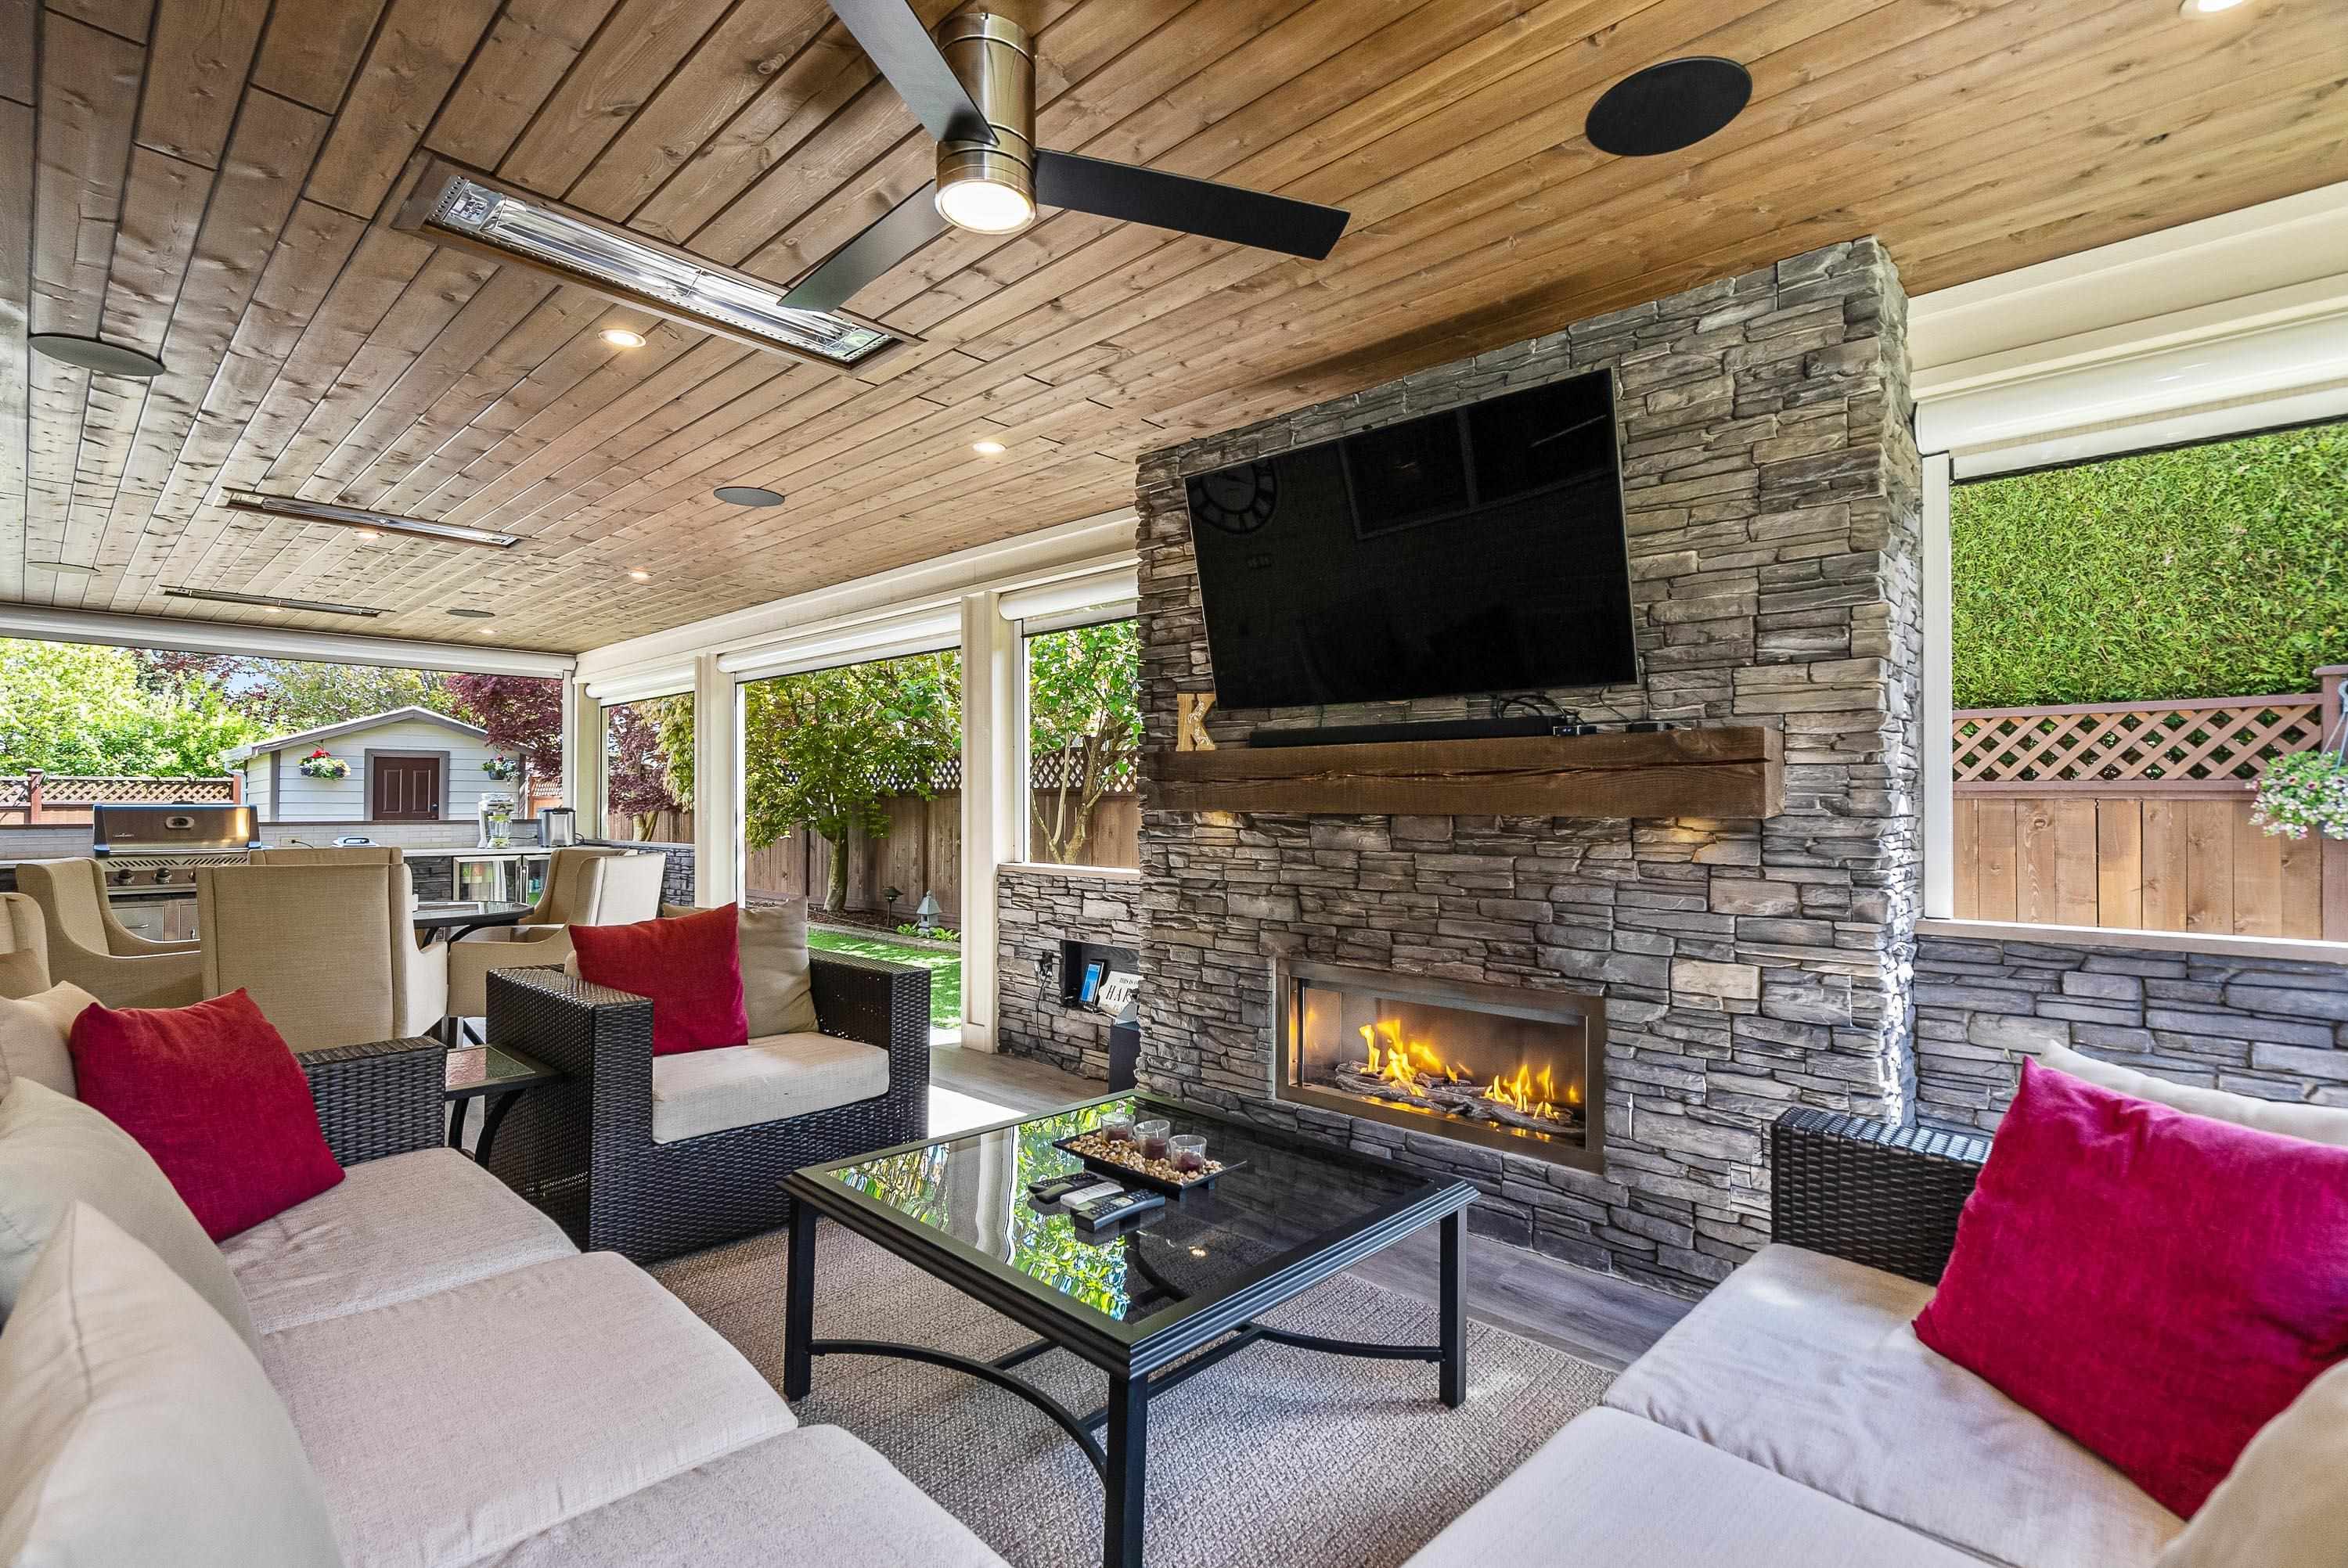 has cozy stone fireplace with rustic cedar mantle